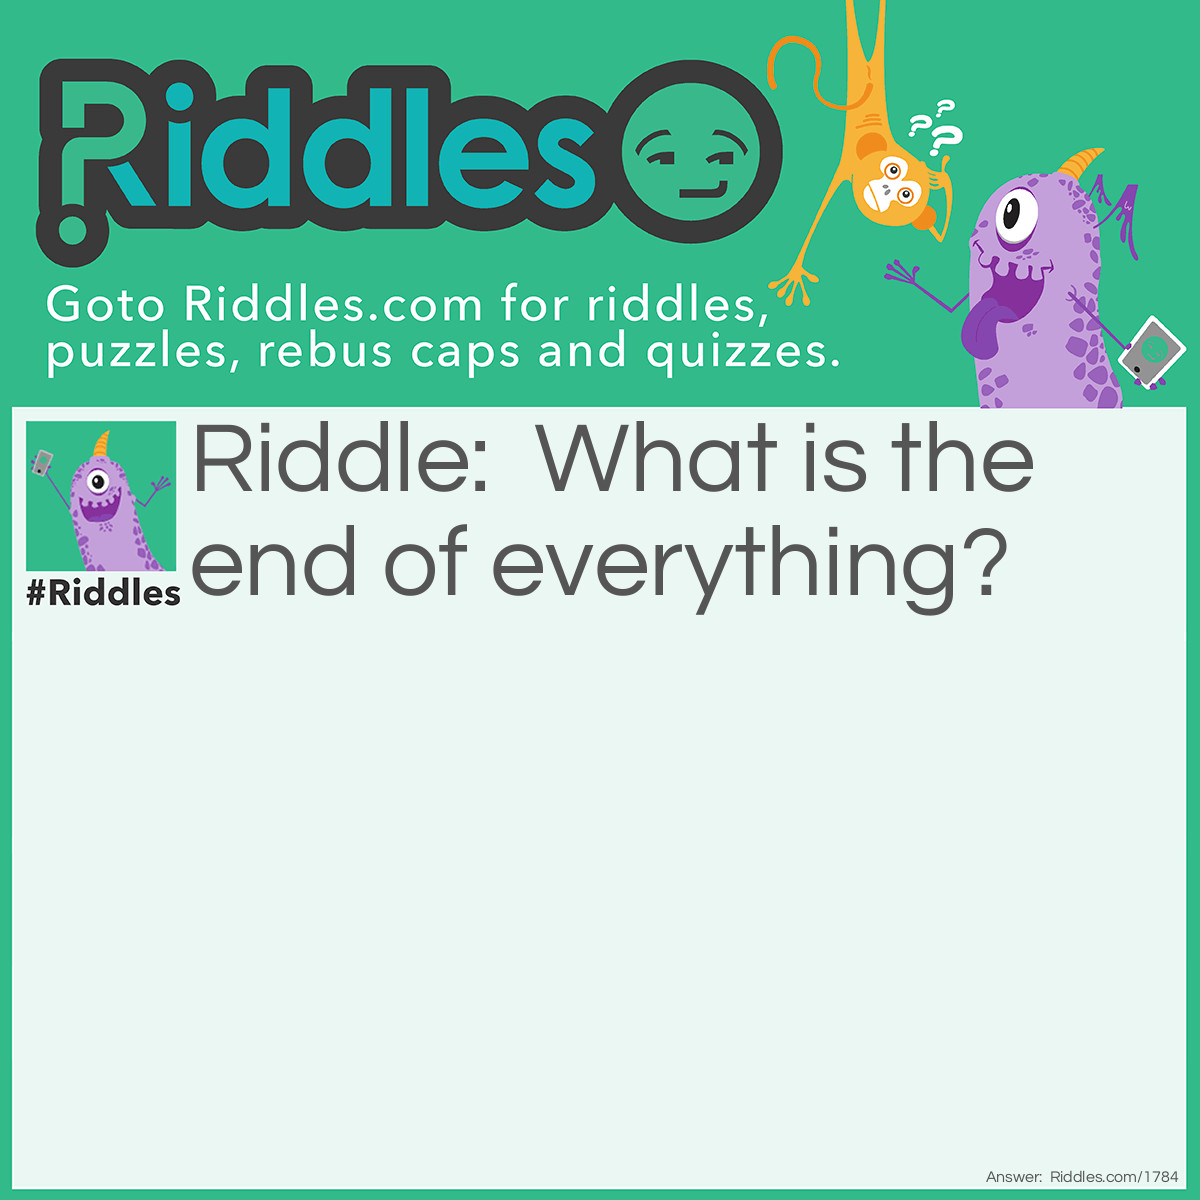 Riddle: What is the end of everything? Answer: The letter "g".